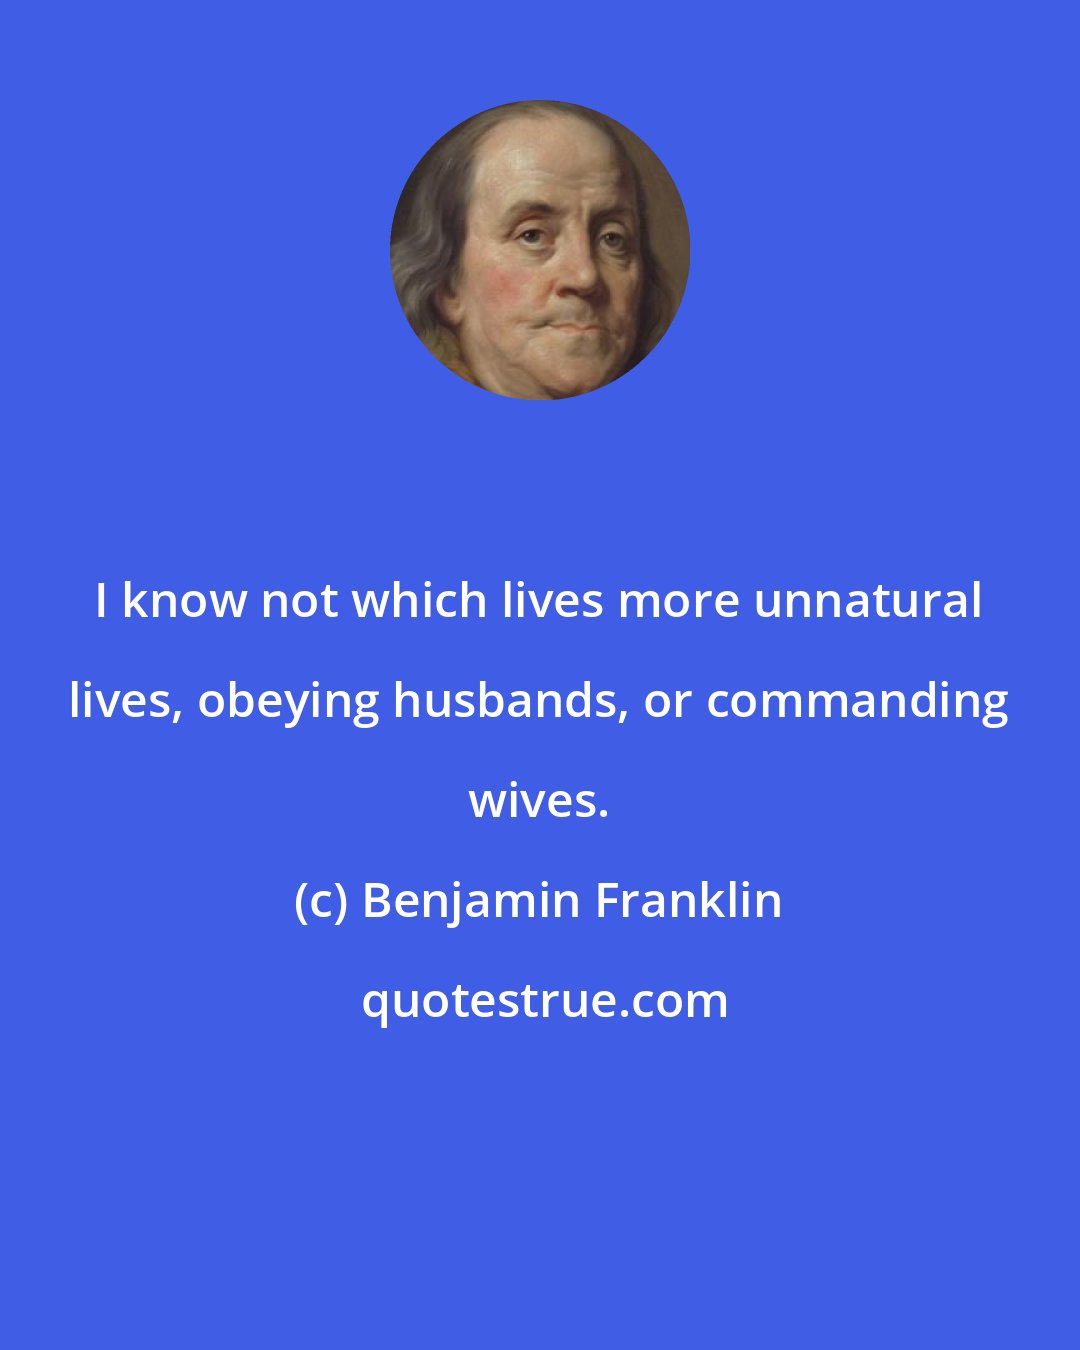 Benjamin Franklin: I know not which lives more unnatural lives, obeying husbands, or commanding wives.